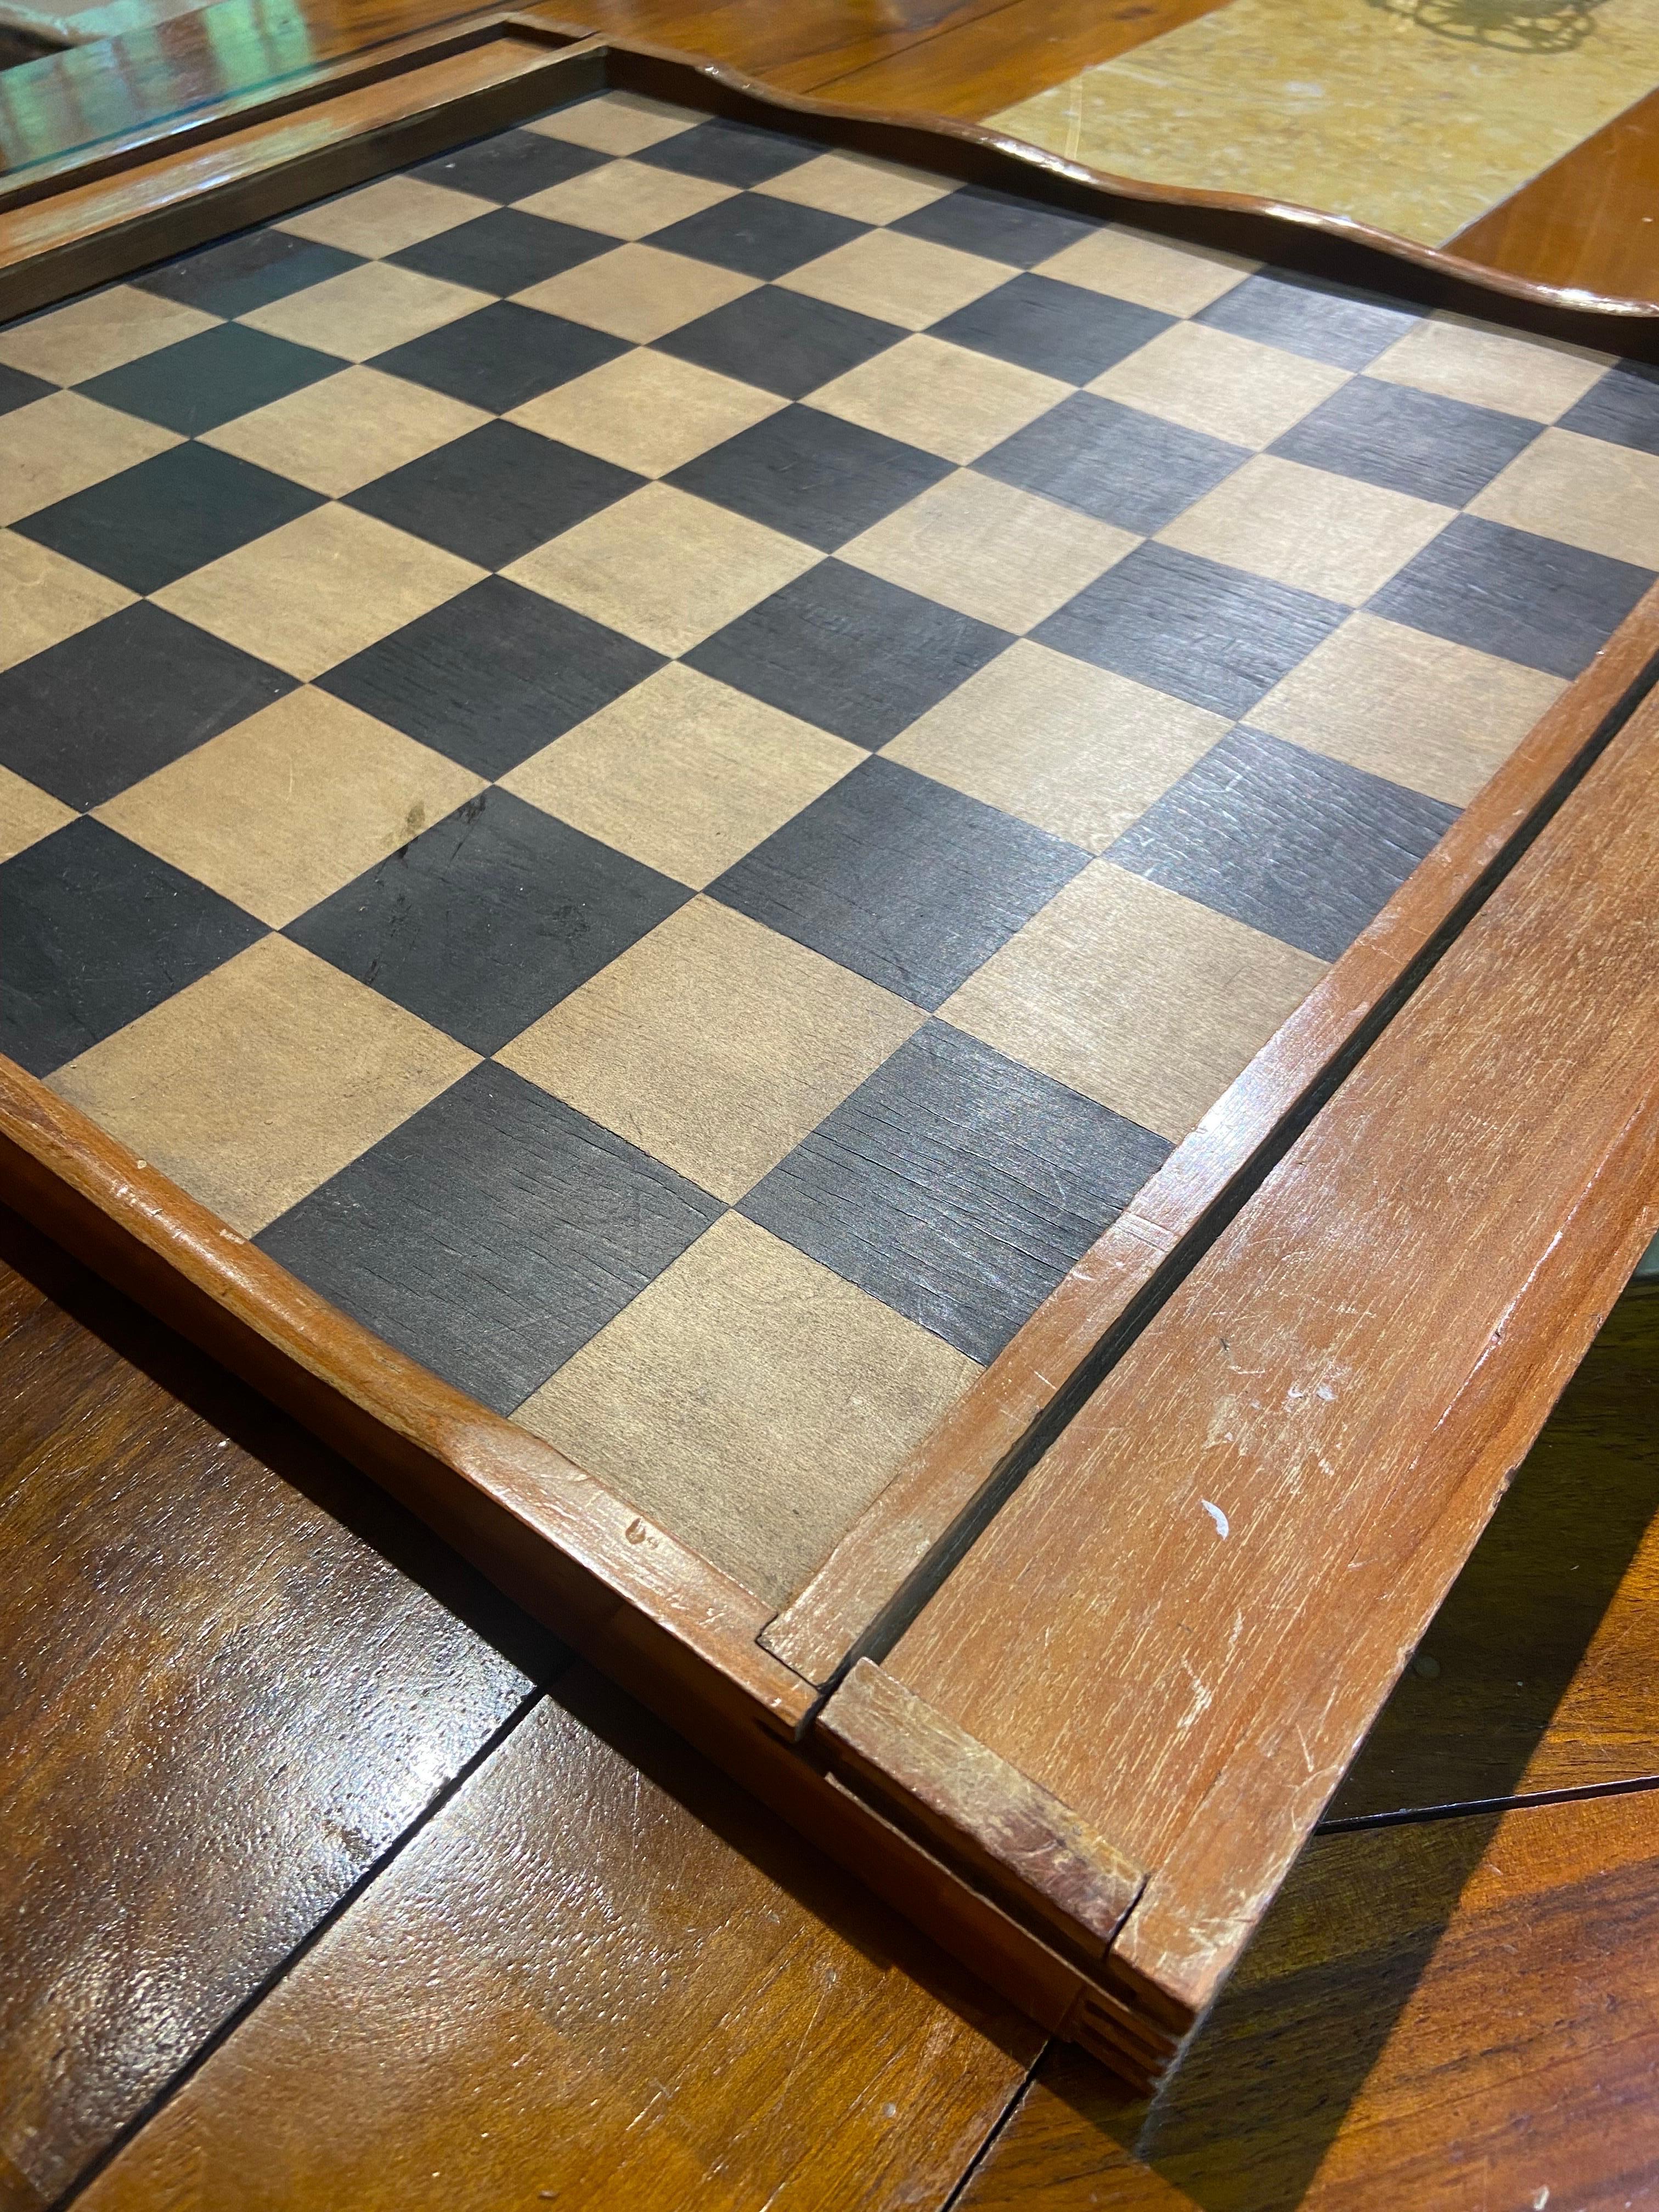 vintage wooden checkers set